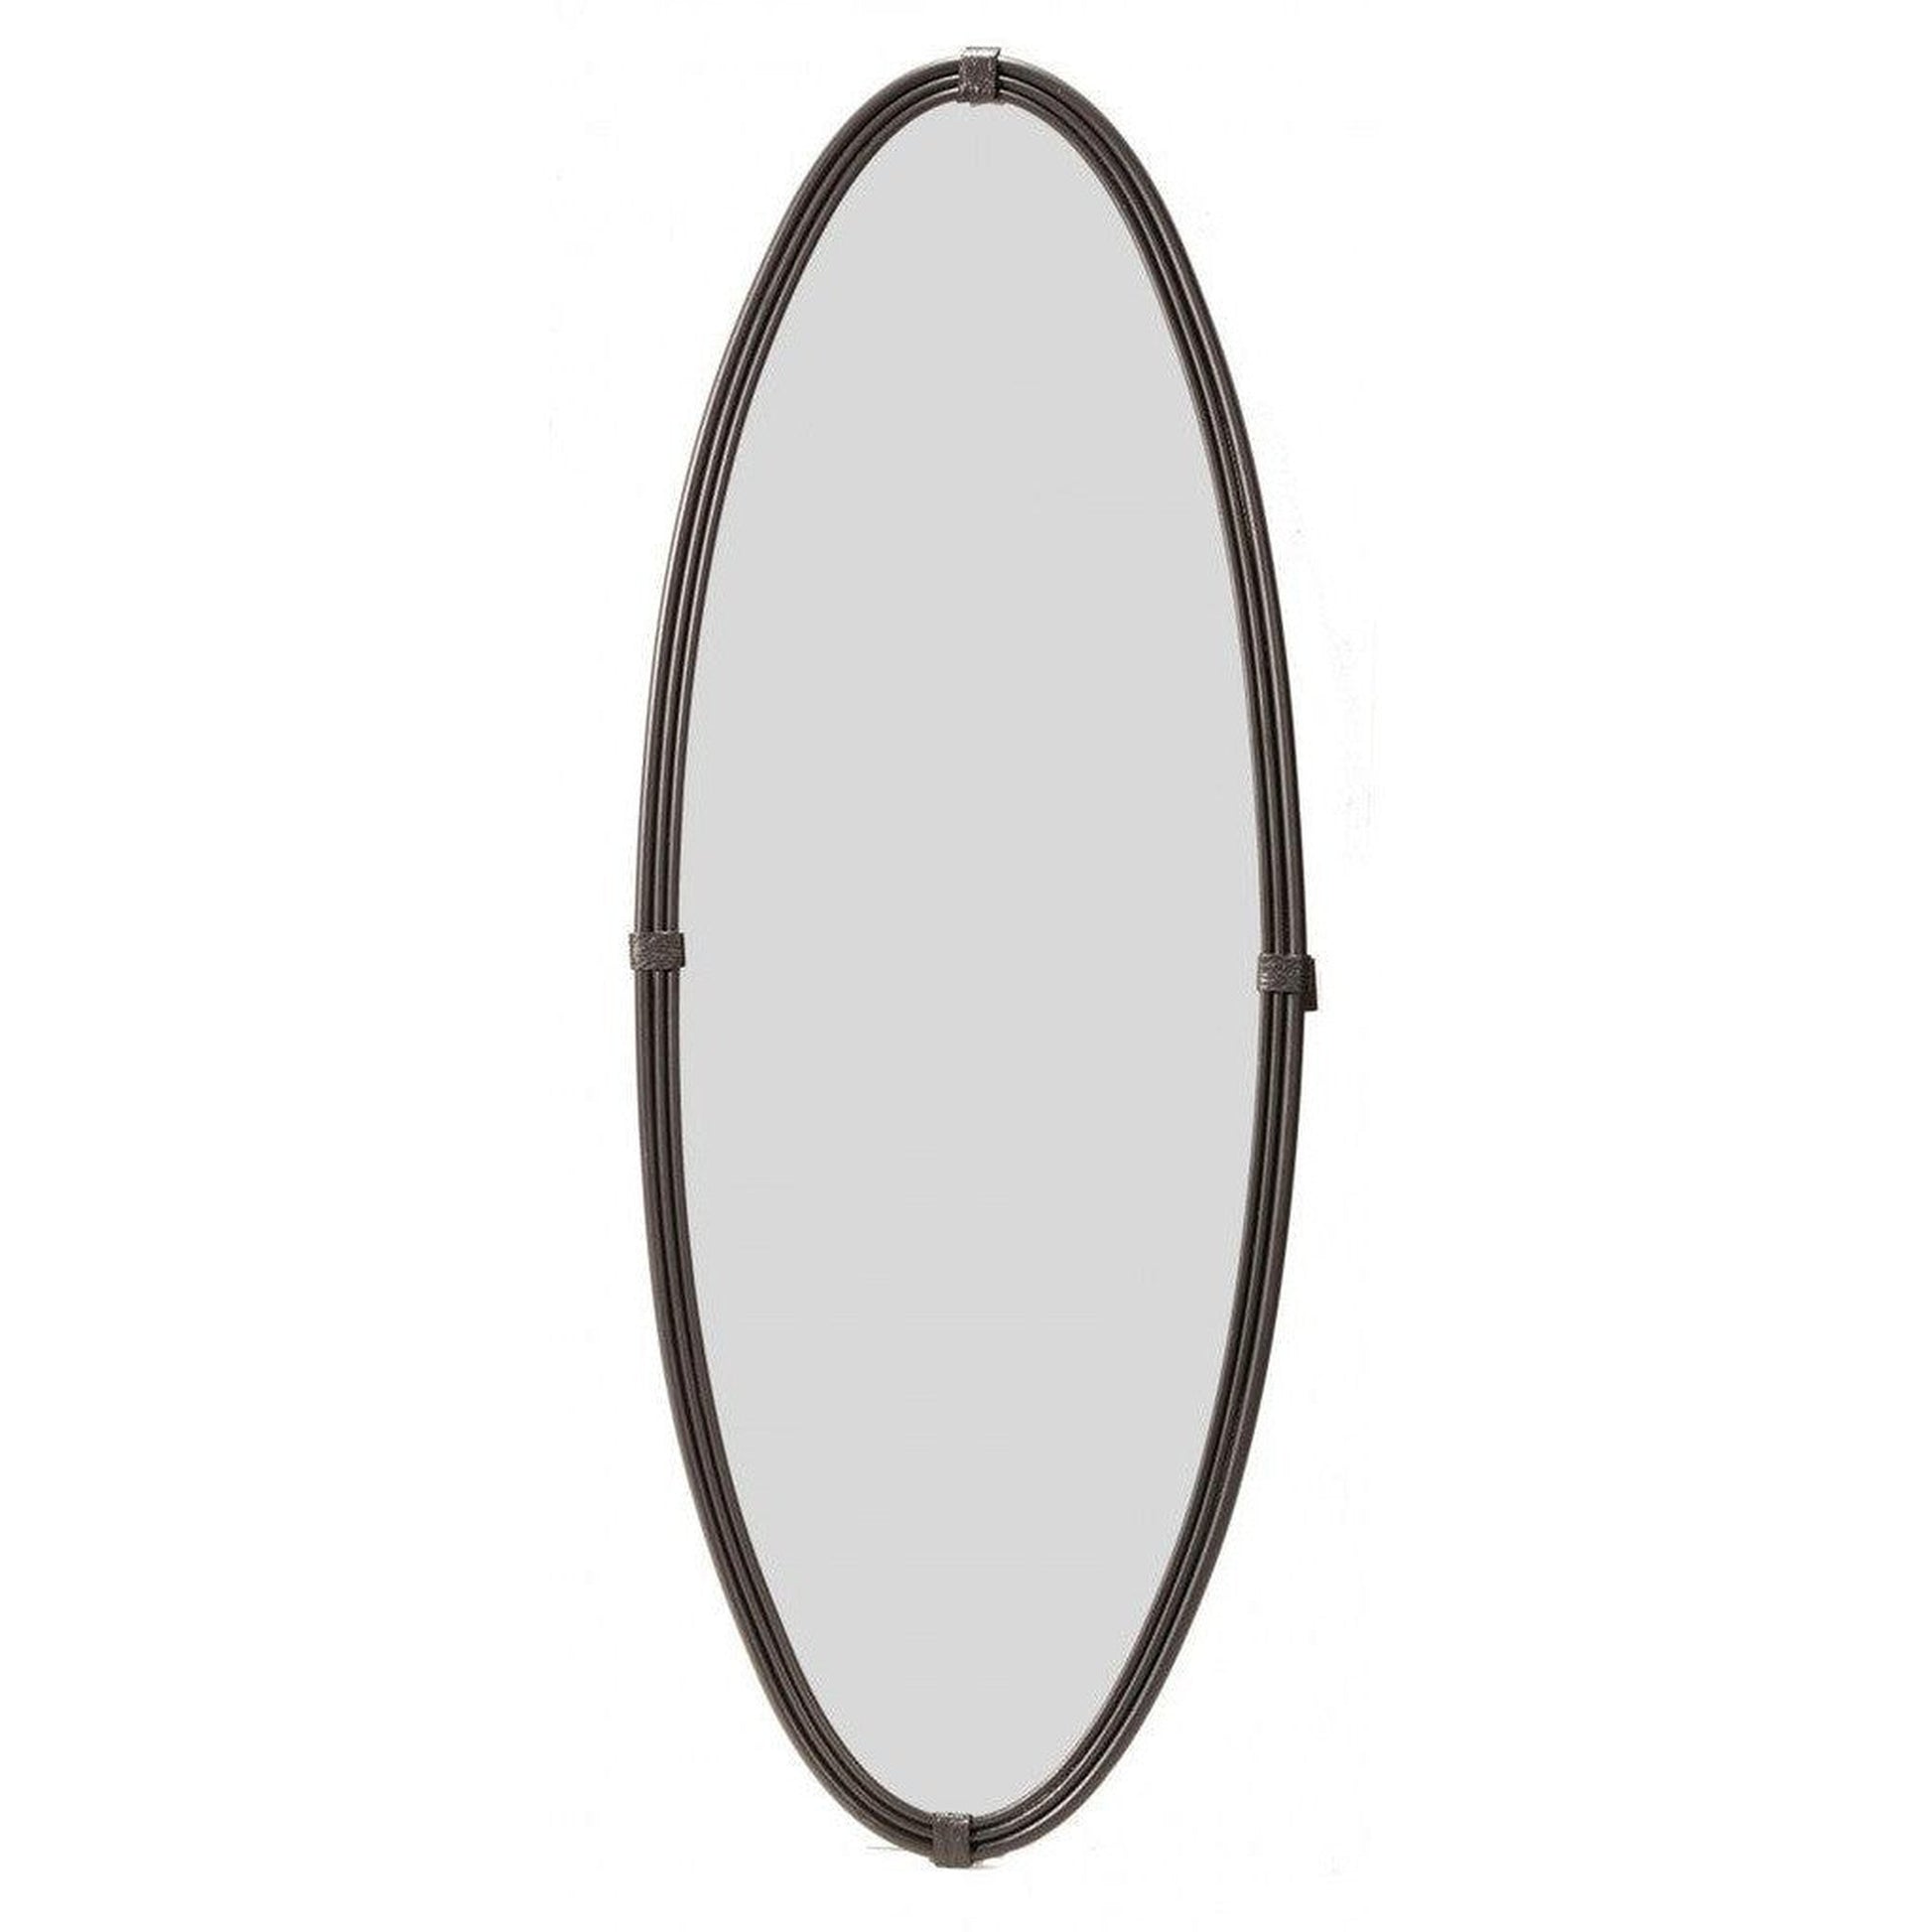 Stone County Ironworks Queensbury 25" Small Woodland Brown Oval Iron Wall Mirror With Copper Iron Accent